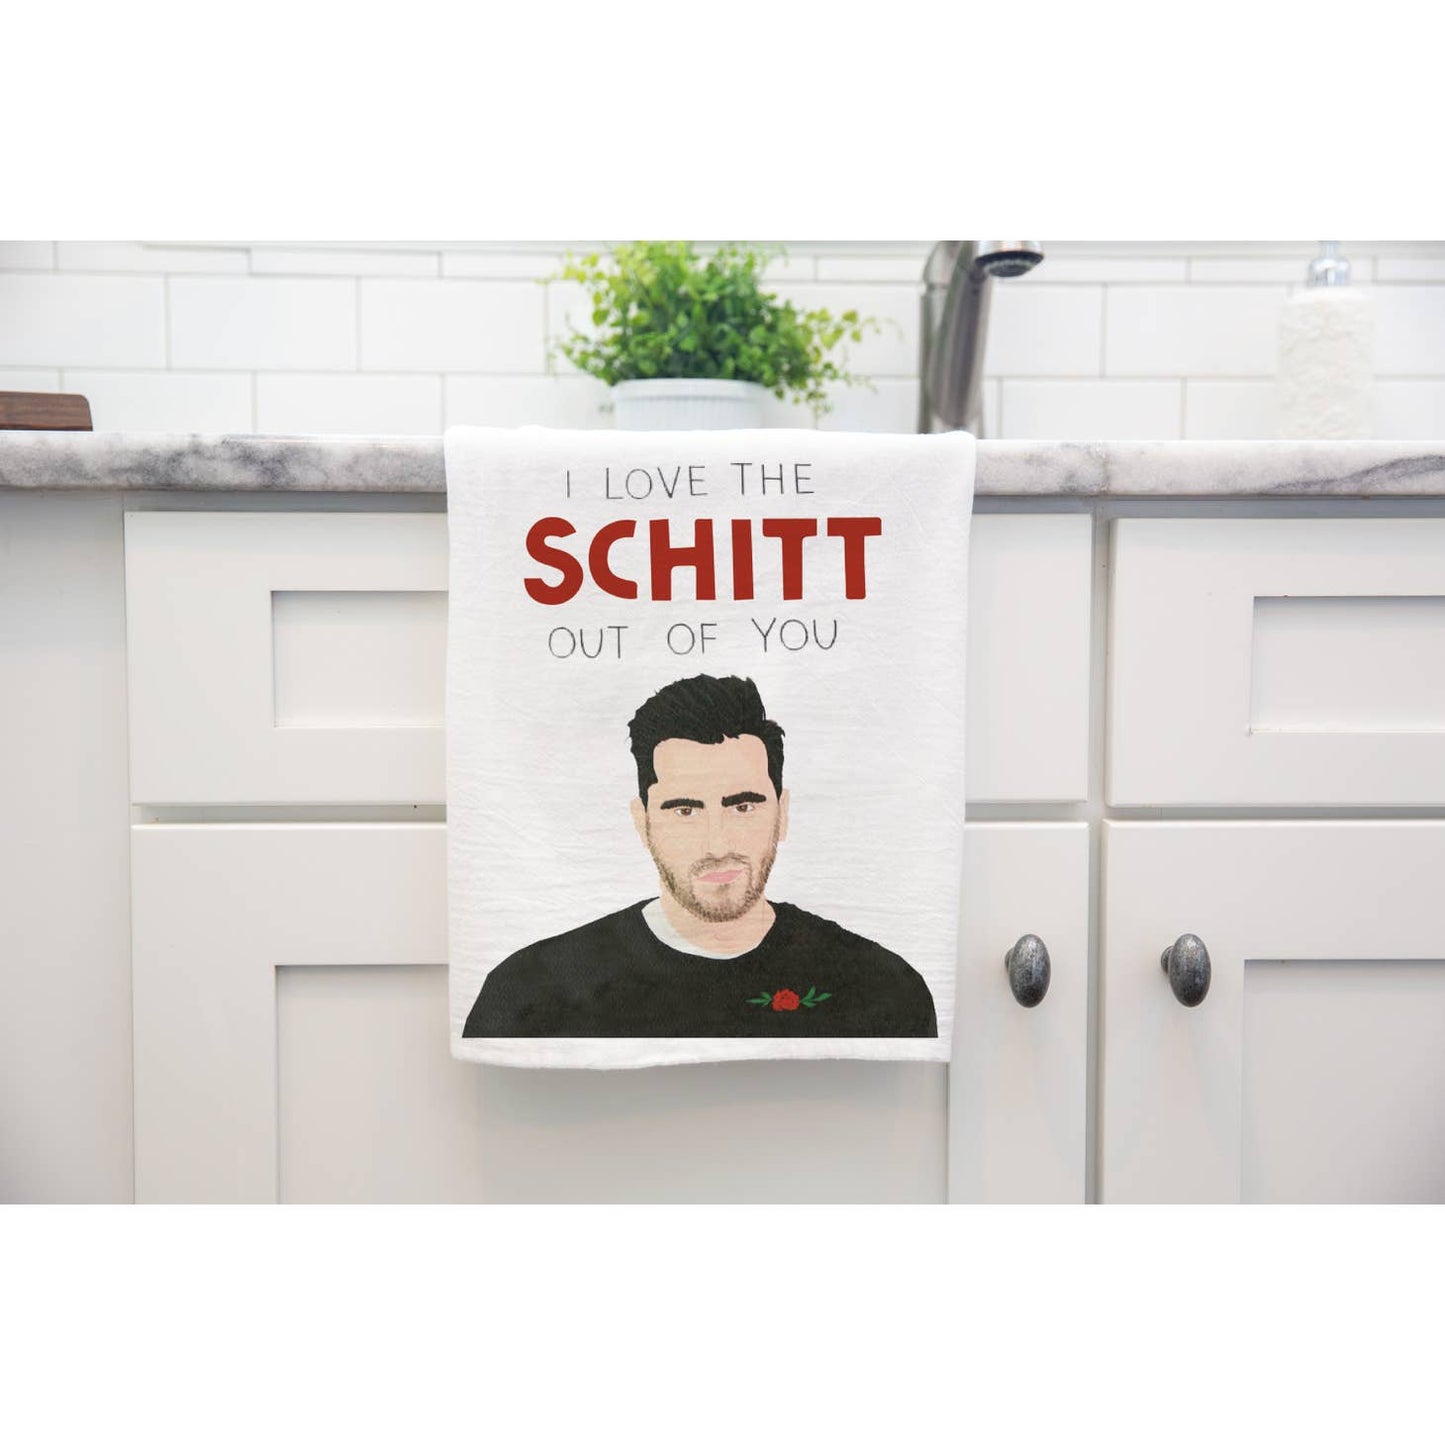 I Love The Schitt Out of You Kitchen Towel